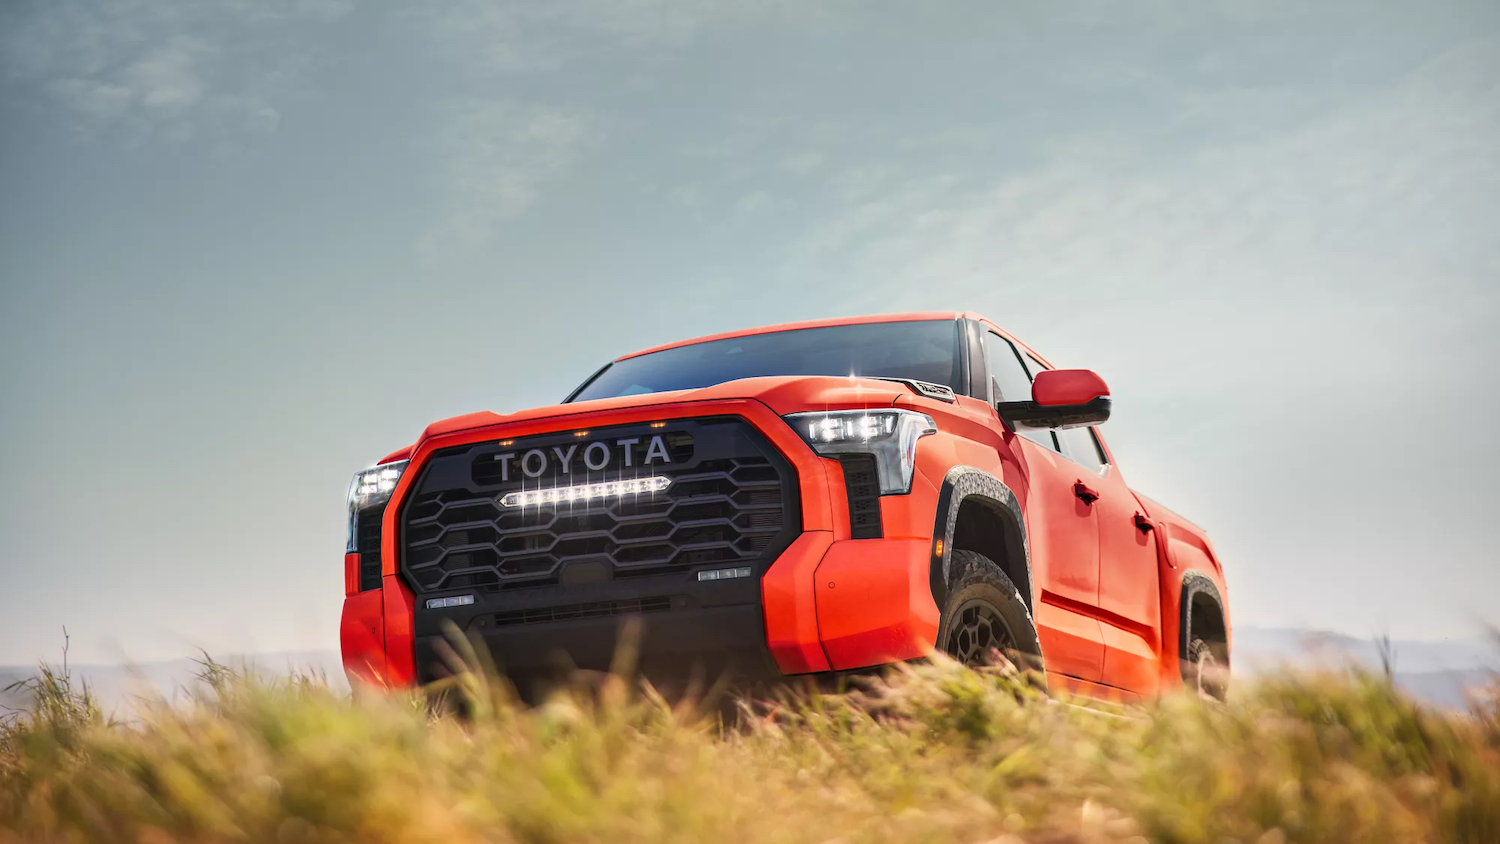 This is a promo photo of the hybrid 2022 Toyota Tundra TRD Pro 4x4 truck | Hybrid